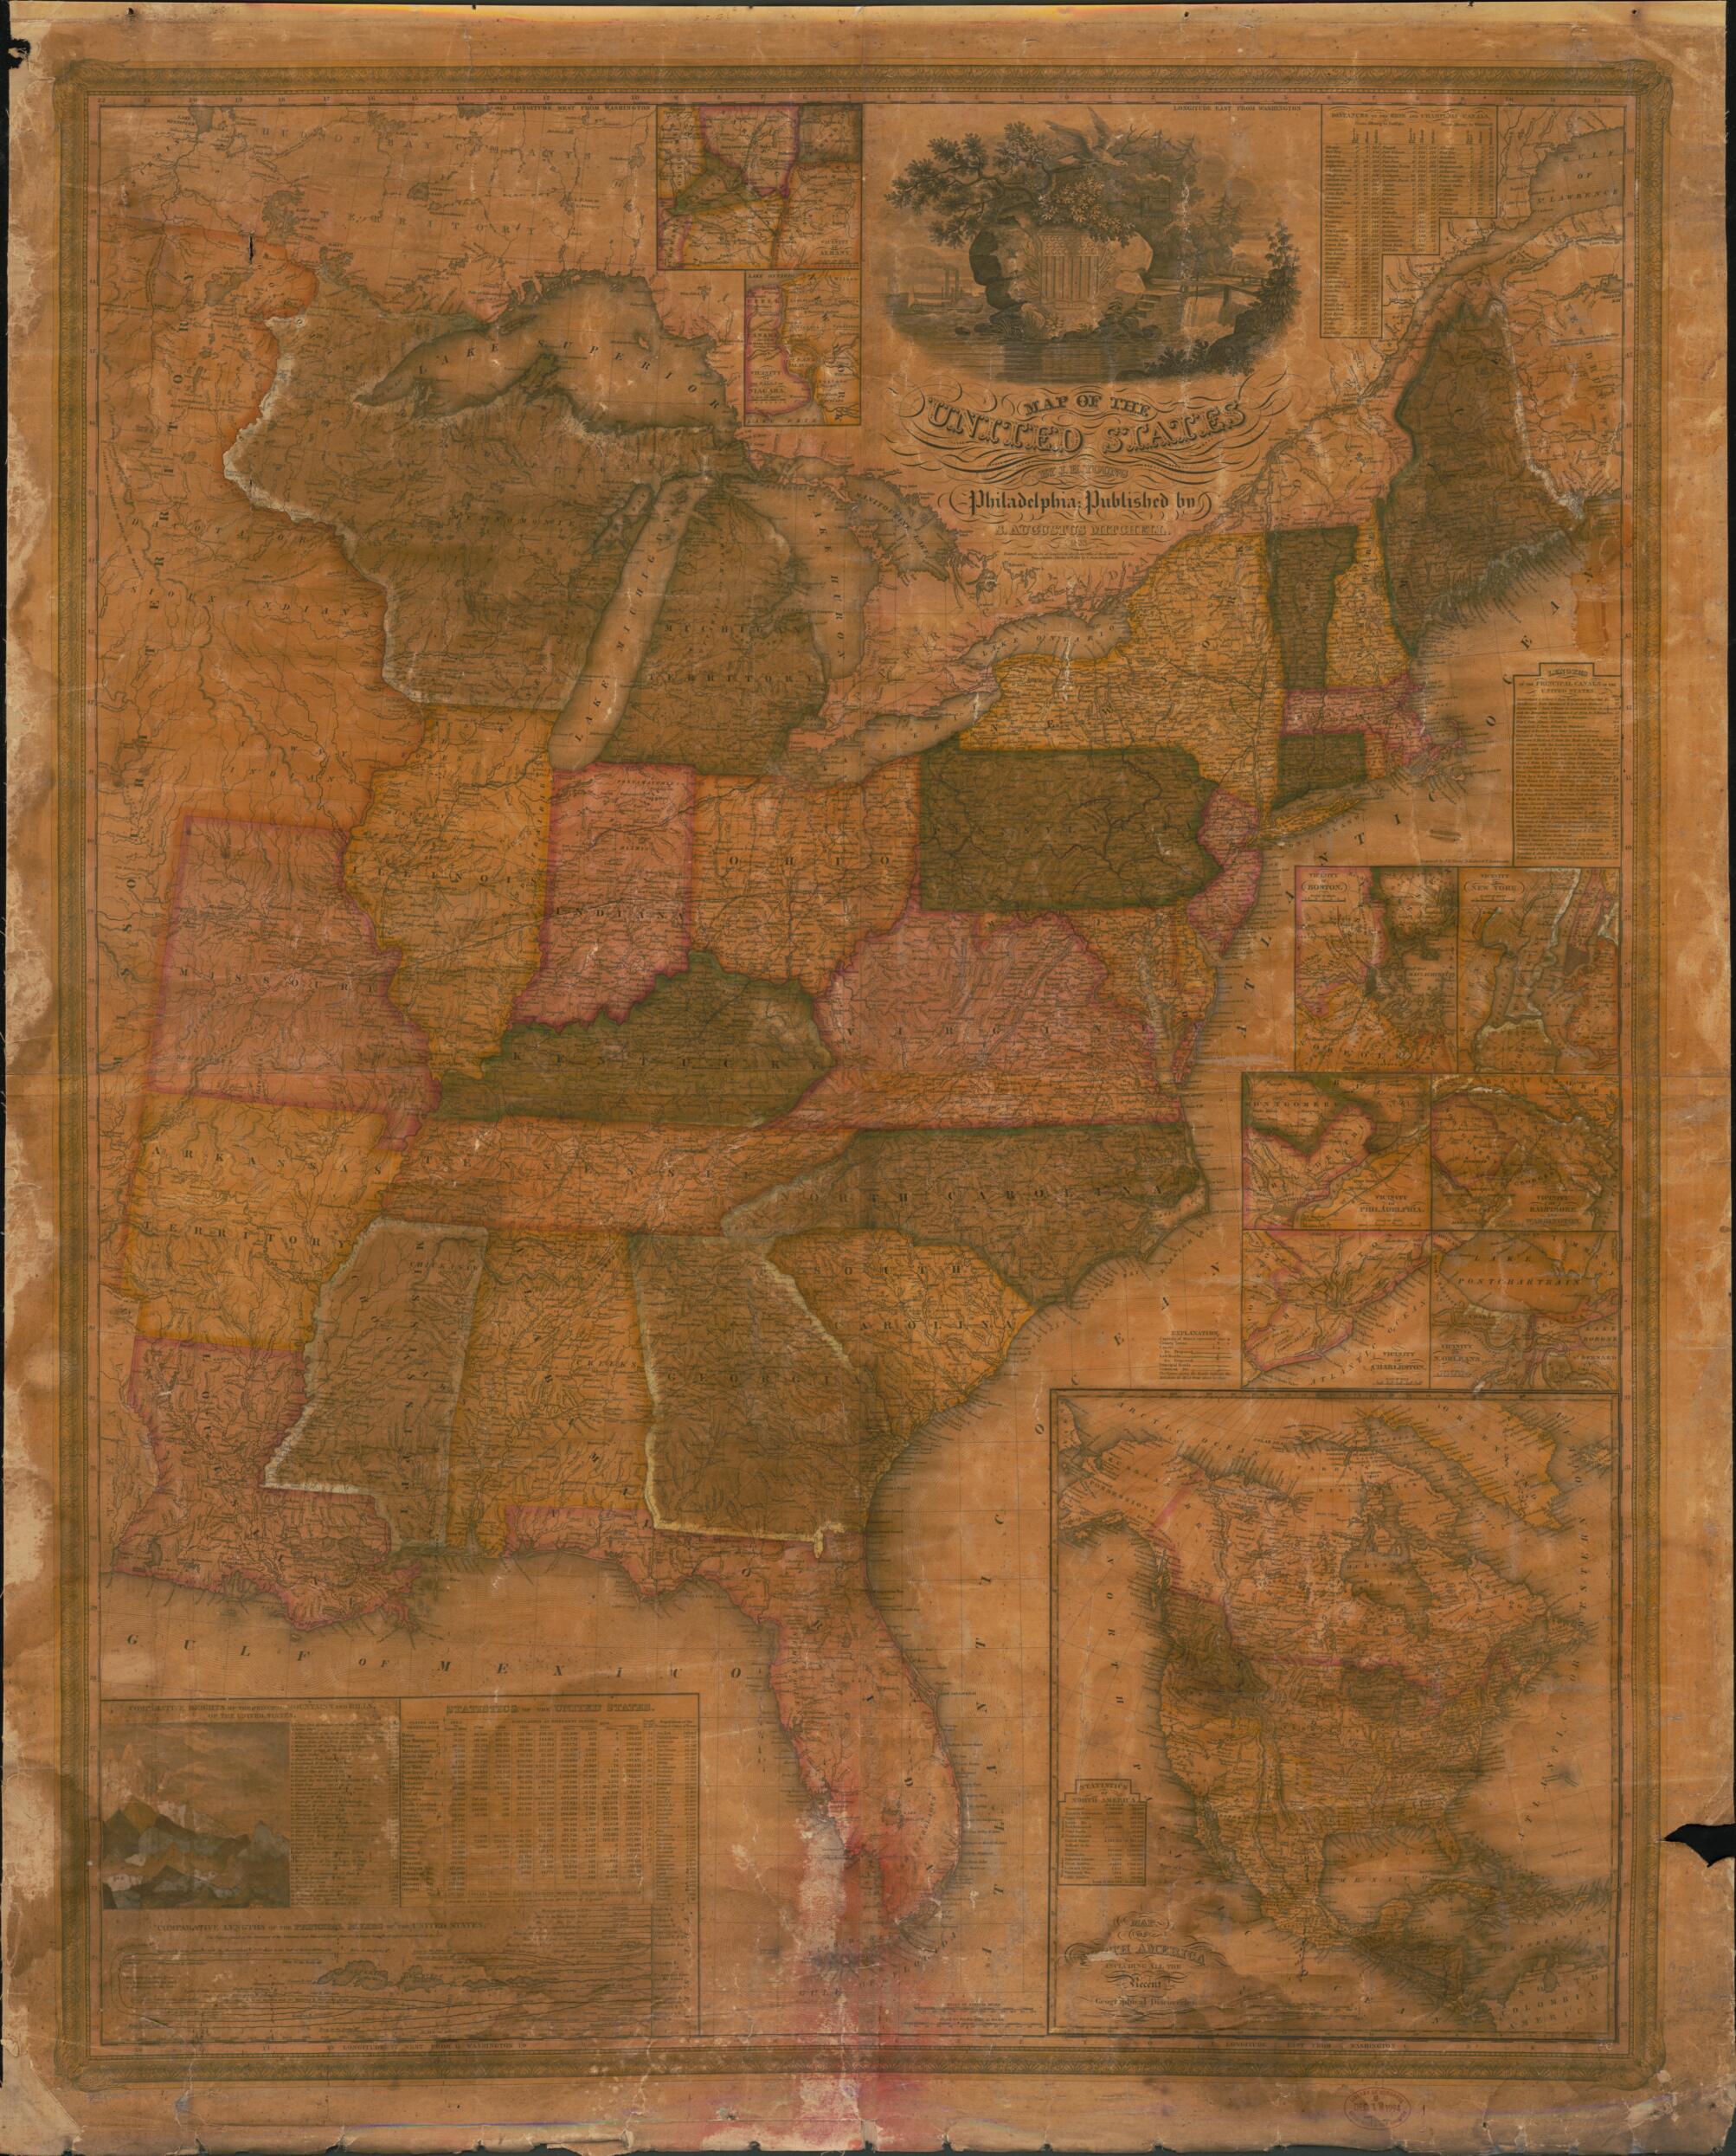 This old map of Map of the United States from 1833 was created by Frederick Dankworth, D. Haines, S. Augustus (Samuel Augustus) Mitchell, J. H. (James Hamilton) Young in 1833